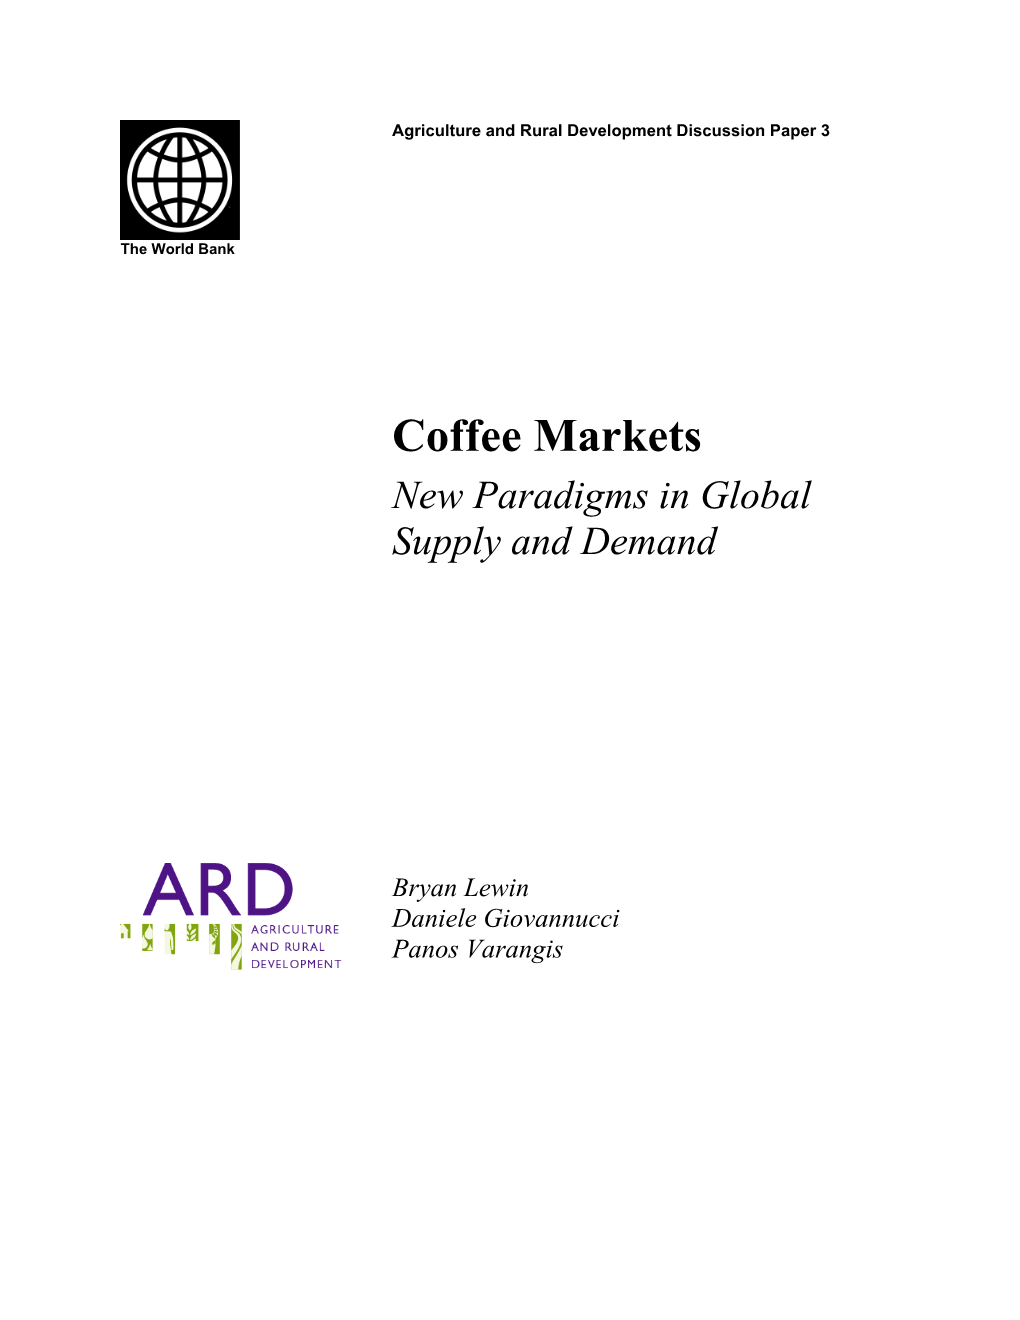 Coffee Markets New Paradigms in Global Supply and Demand